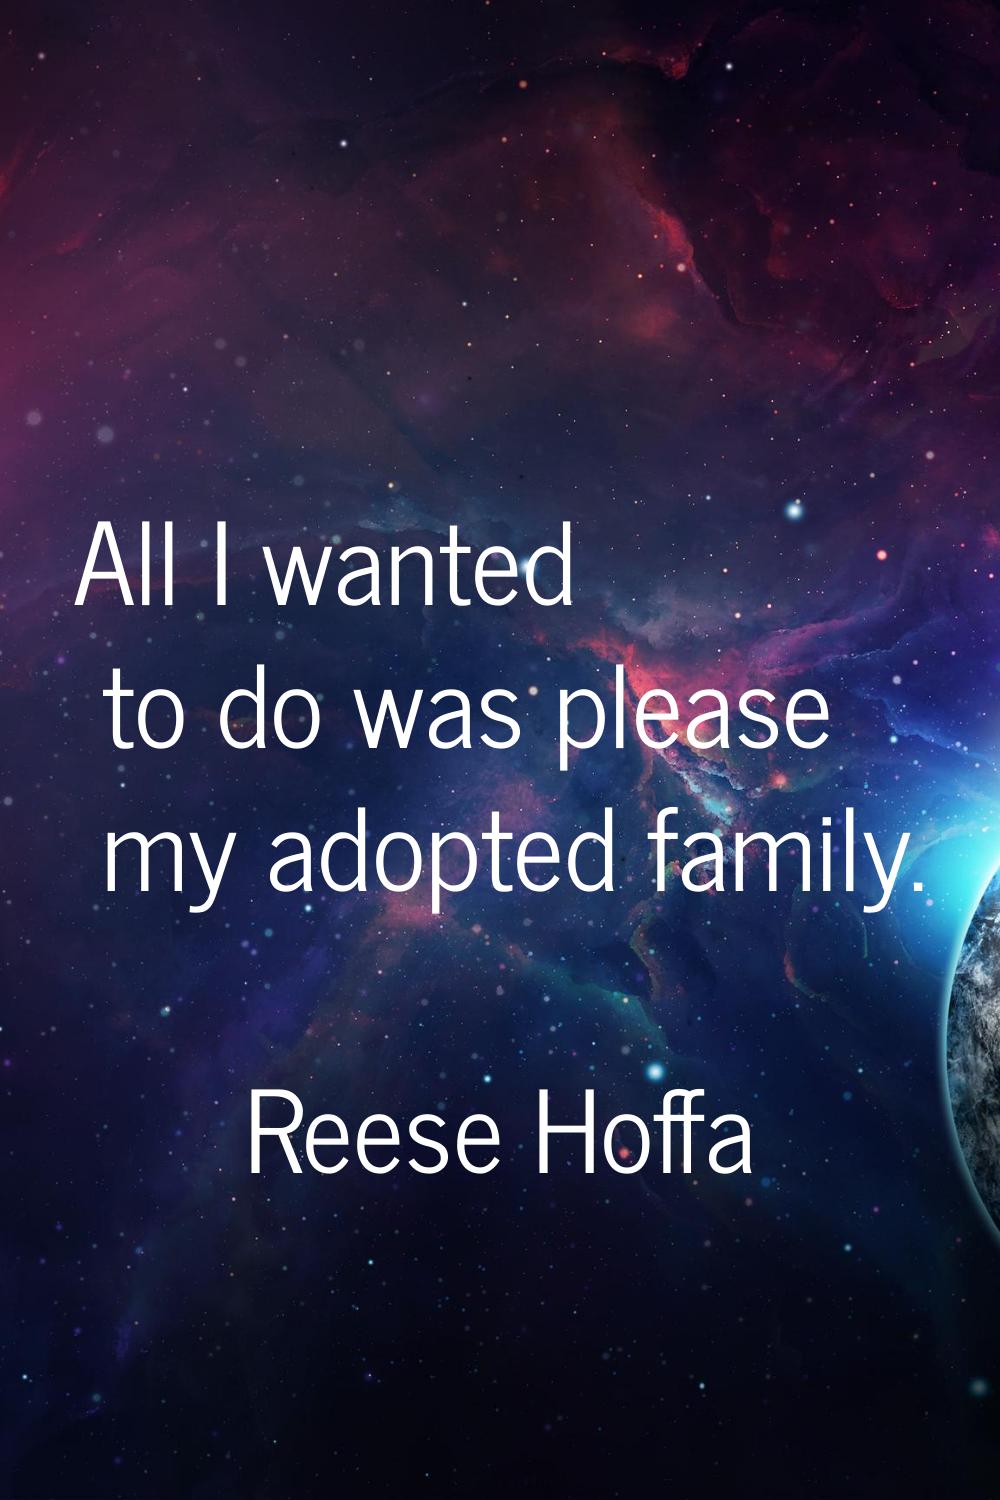 All I wanted to do was please my adopted family.